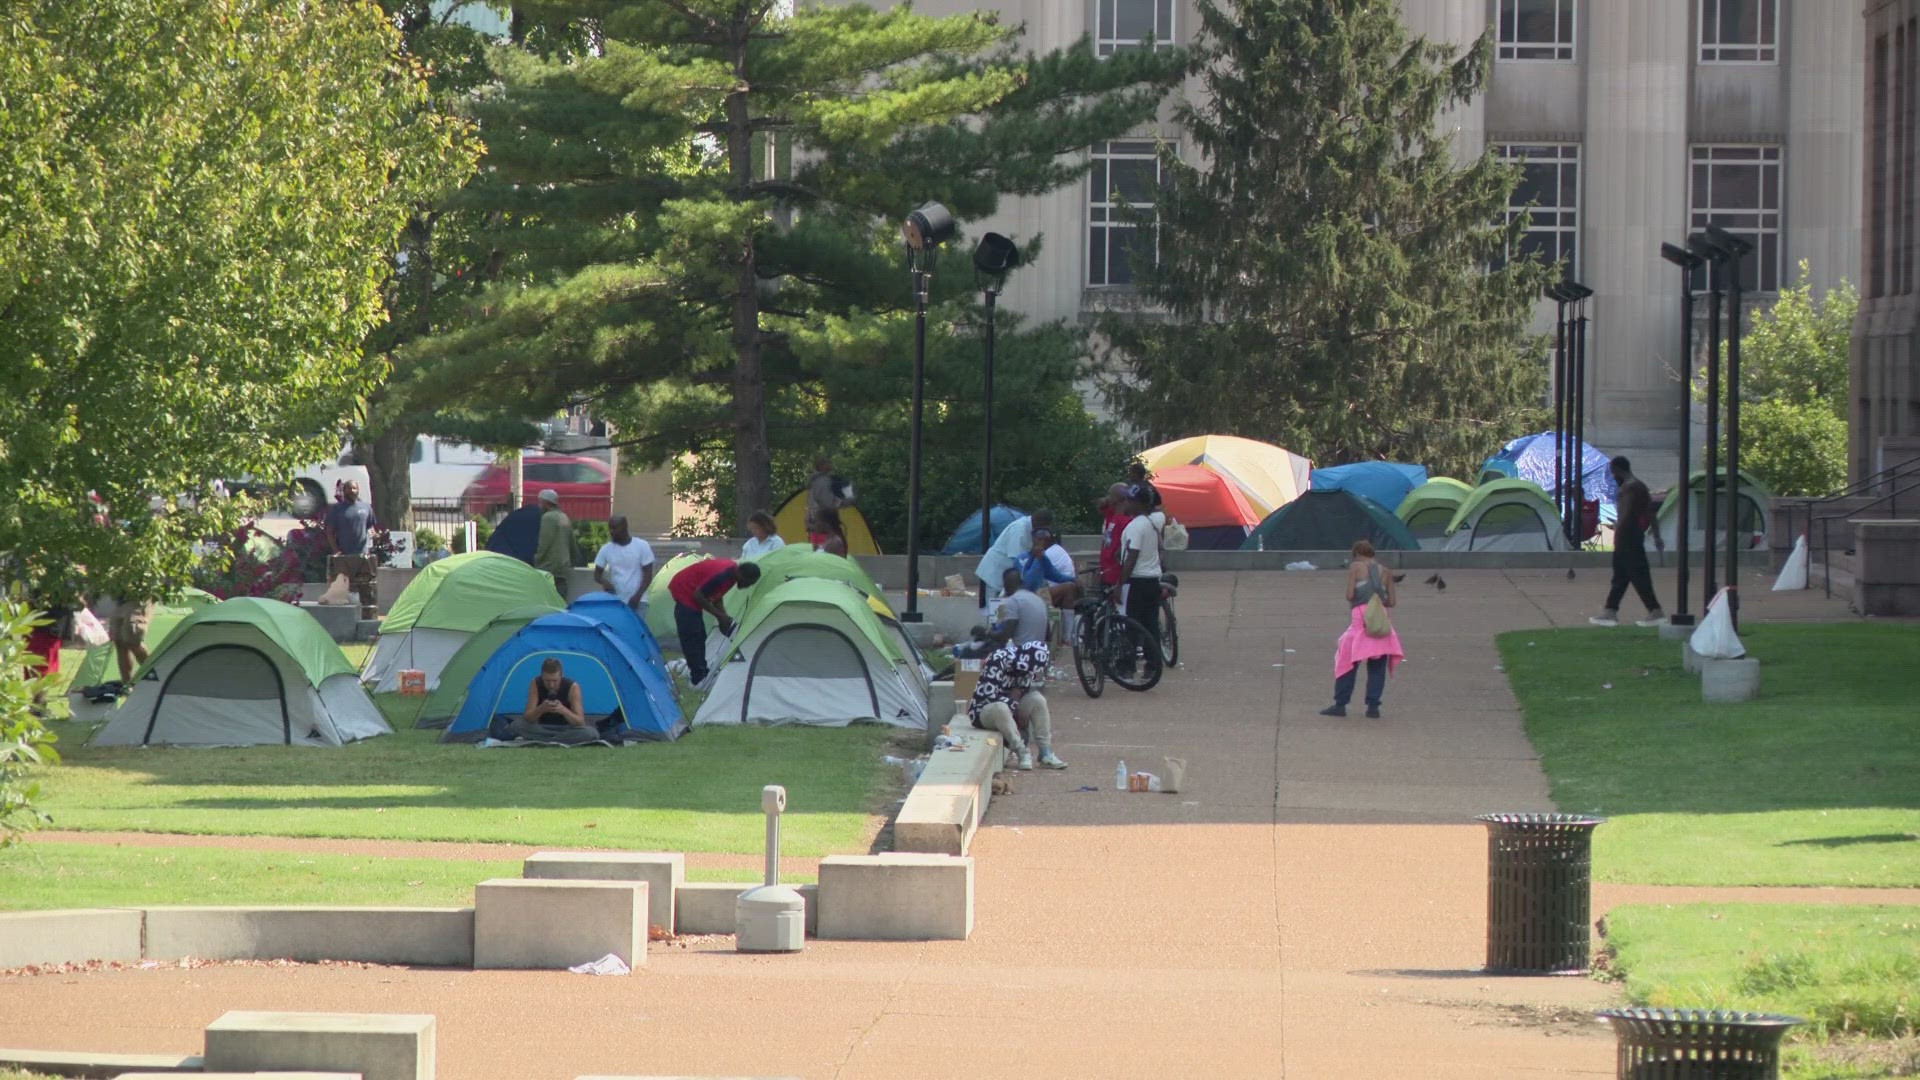 As a homeless encampment continues to grow outside of St. Louis City Hall there are new calls for city leaders to take action. Hundreds of people face homelessness.